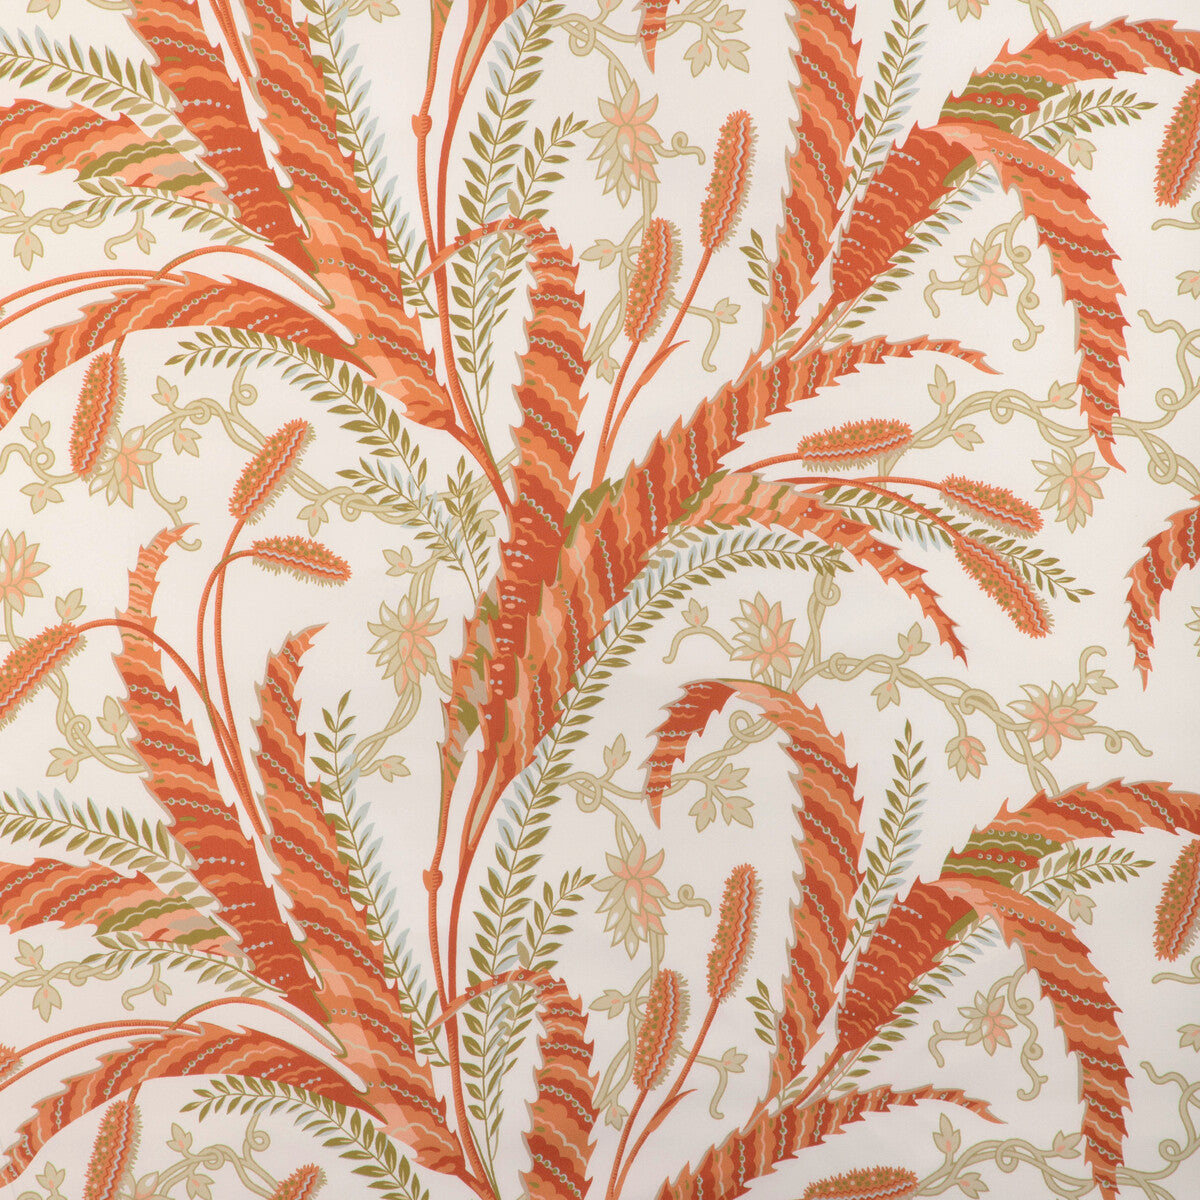 Vernay Print fabric in apricot color - pattern 8023101.12.0 - by Brunschwig &amp; Fils in the Cadenet collection